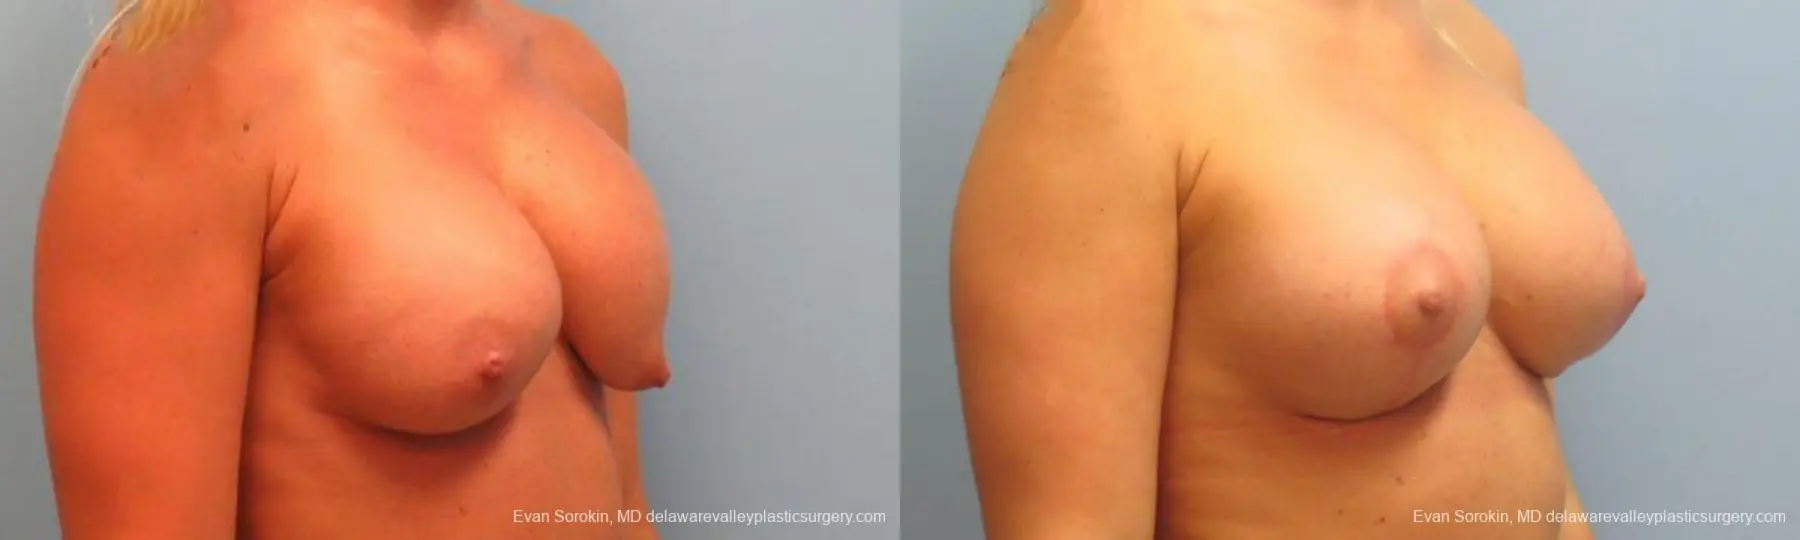 Philadelphia Breast Augmentation 9369 - Before and After 4